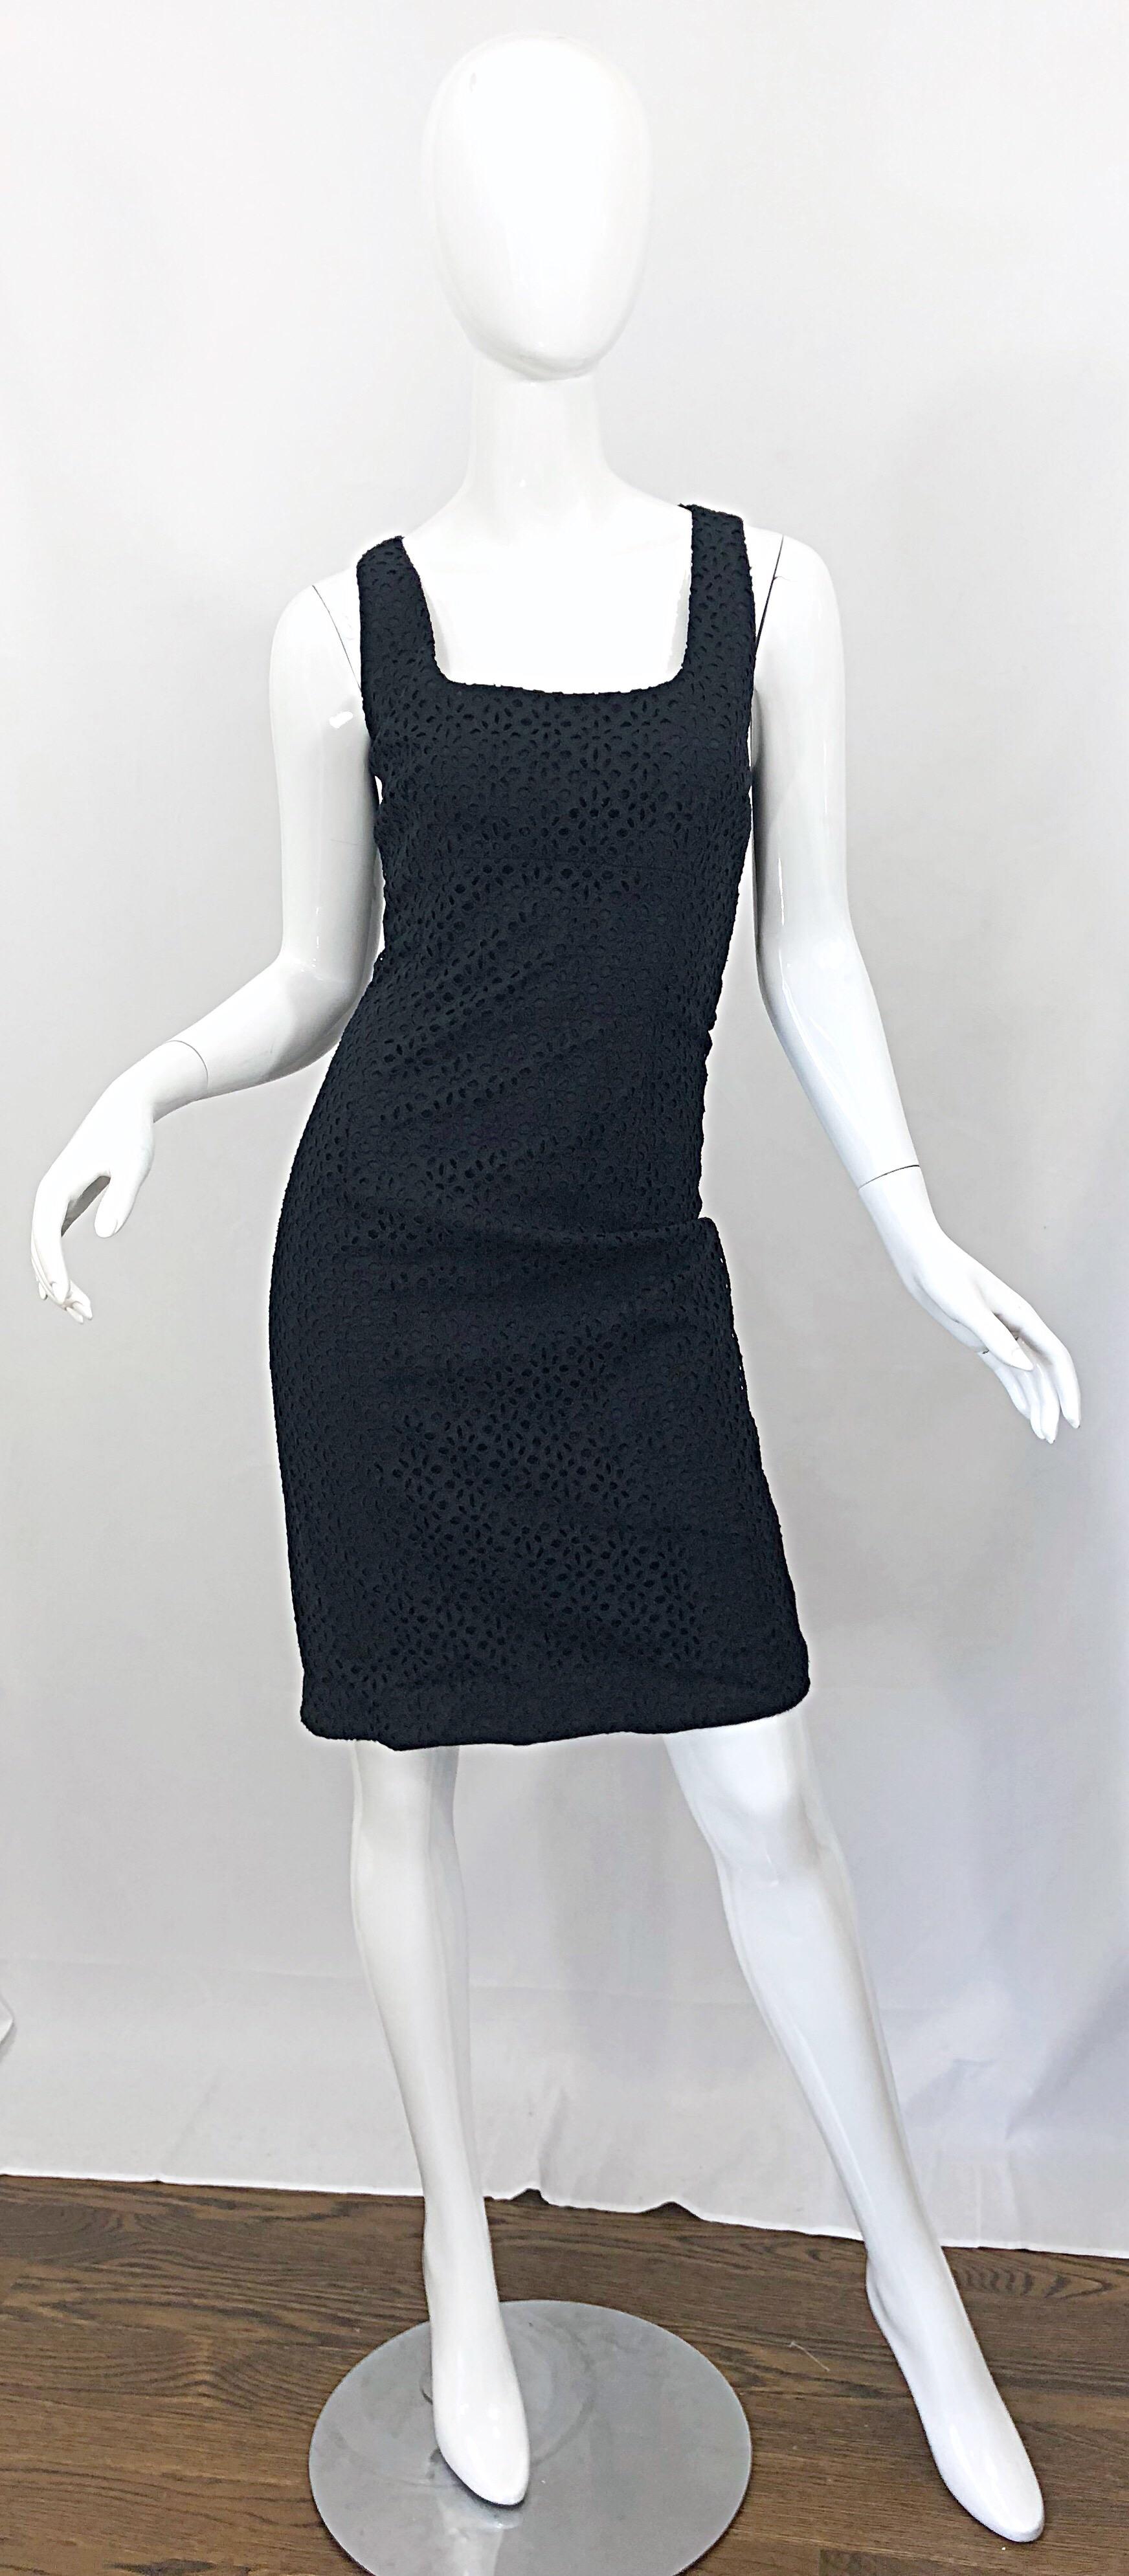 The perfect new MICHAEL KORS COLLECTION Runway Size 10 little black dress! Retailed for $1,895.
 Features a soft cotton with cut-out eyelets throughout. Wonderful flattering fit hides any 'problem' areas. Hidden zipper up the back with hook-and-eye